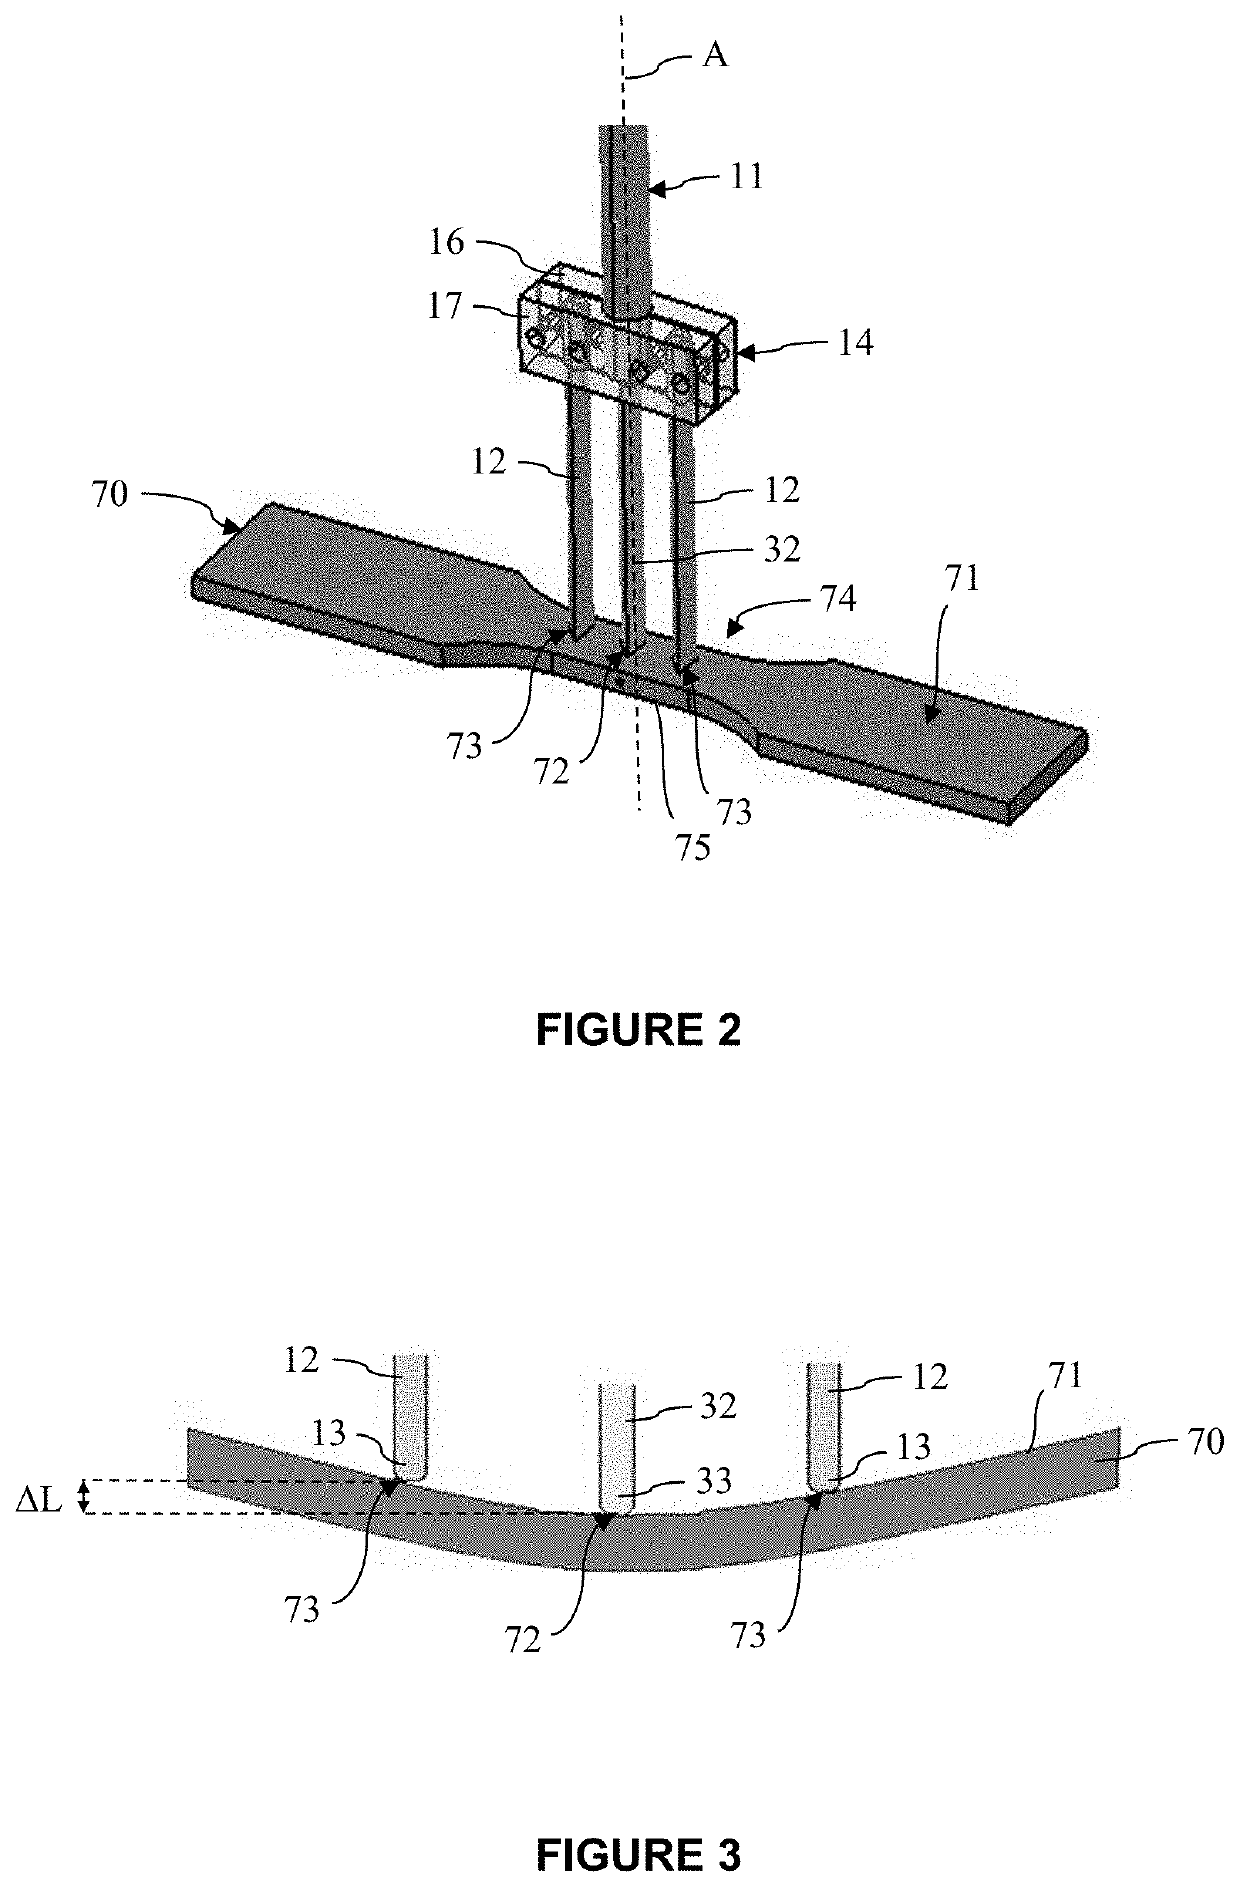 System for measuring a bending deformation of a surface of a material